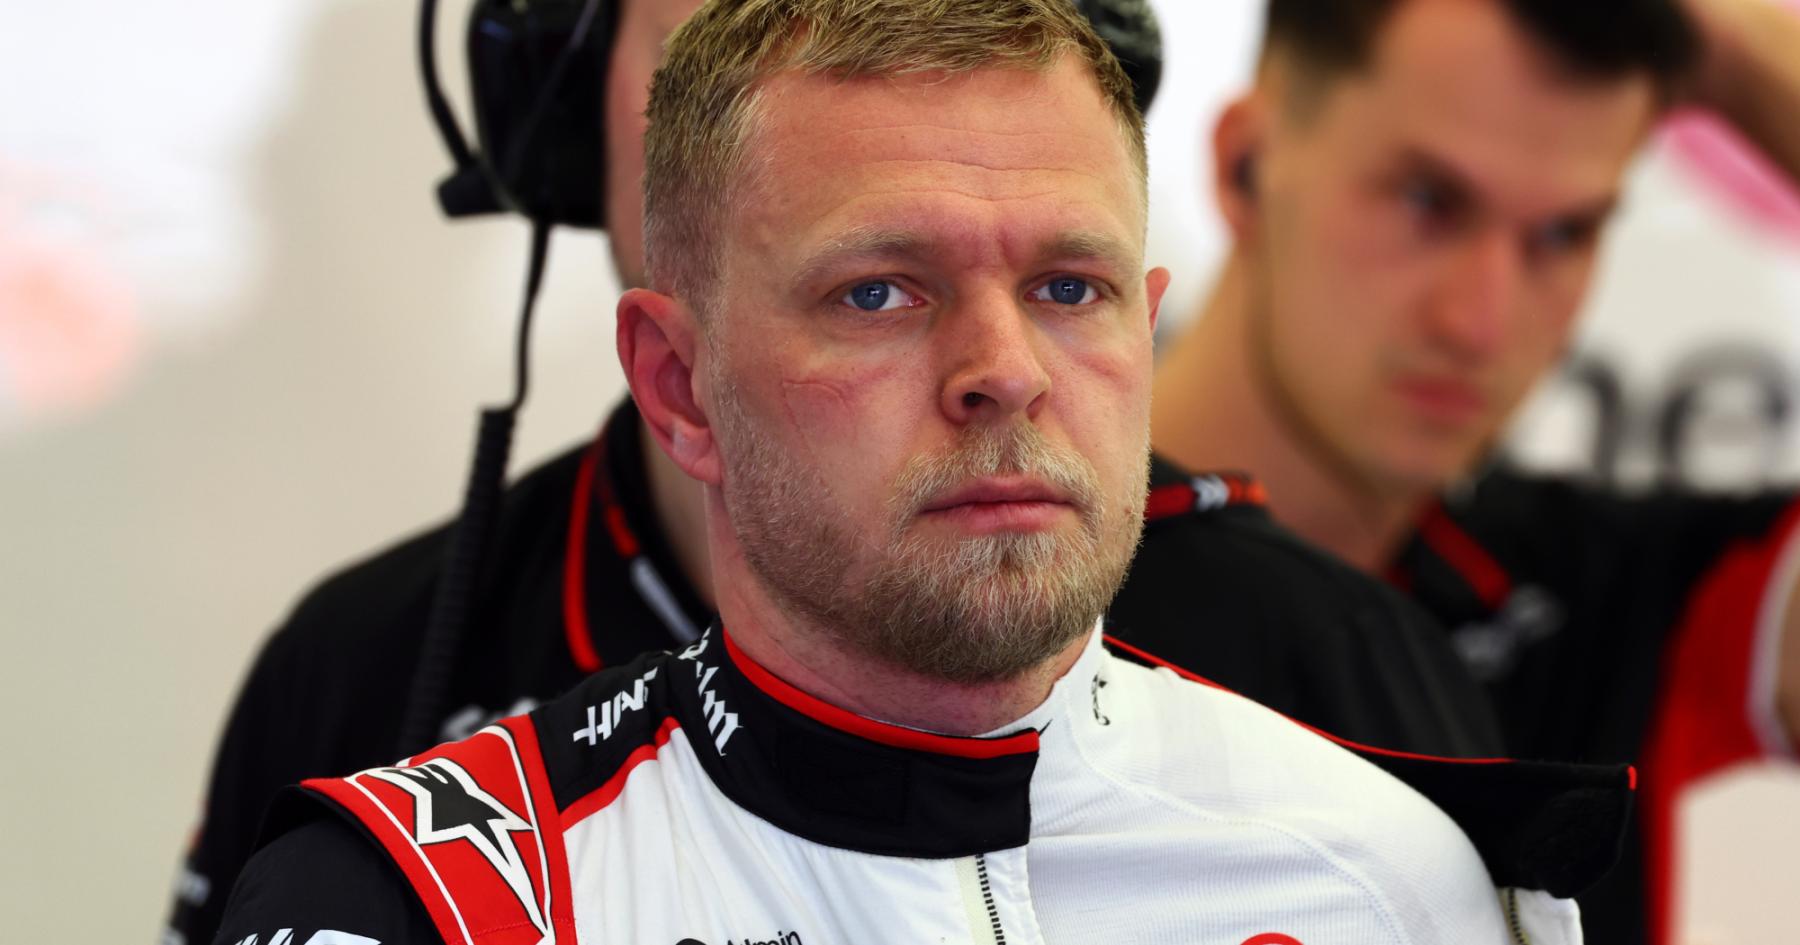 The Magnussen Dilemma: Should a Race Ban be Implemented for Reaching 12 Penalty Points?